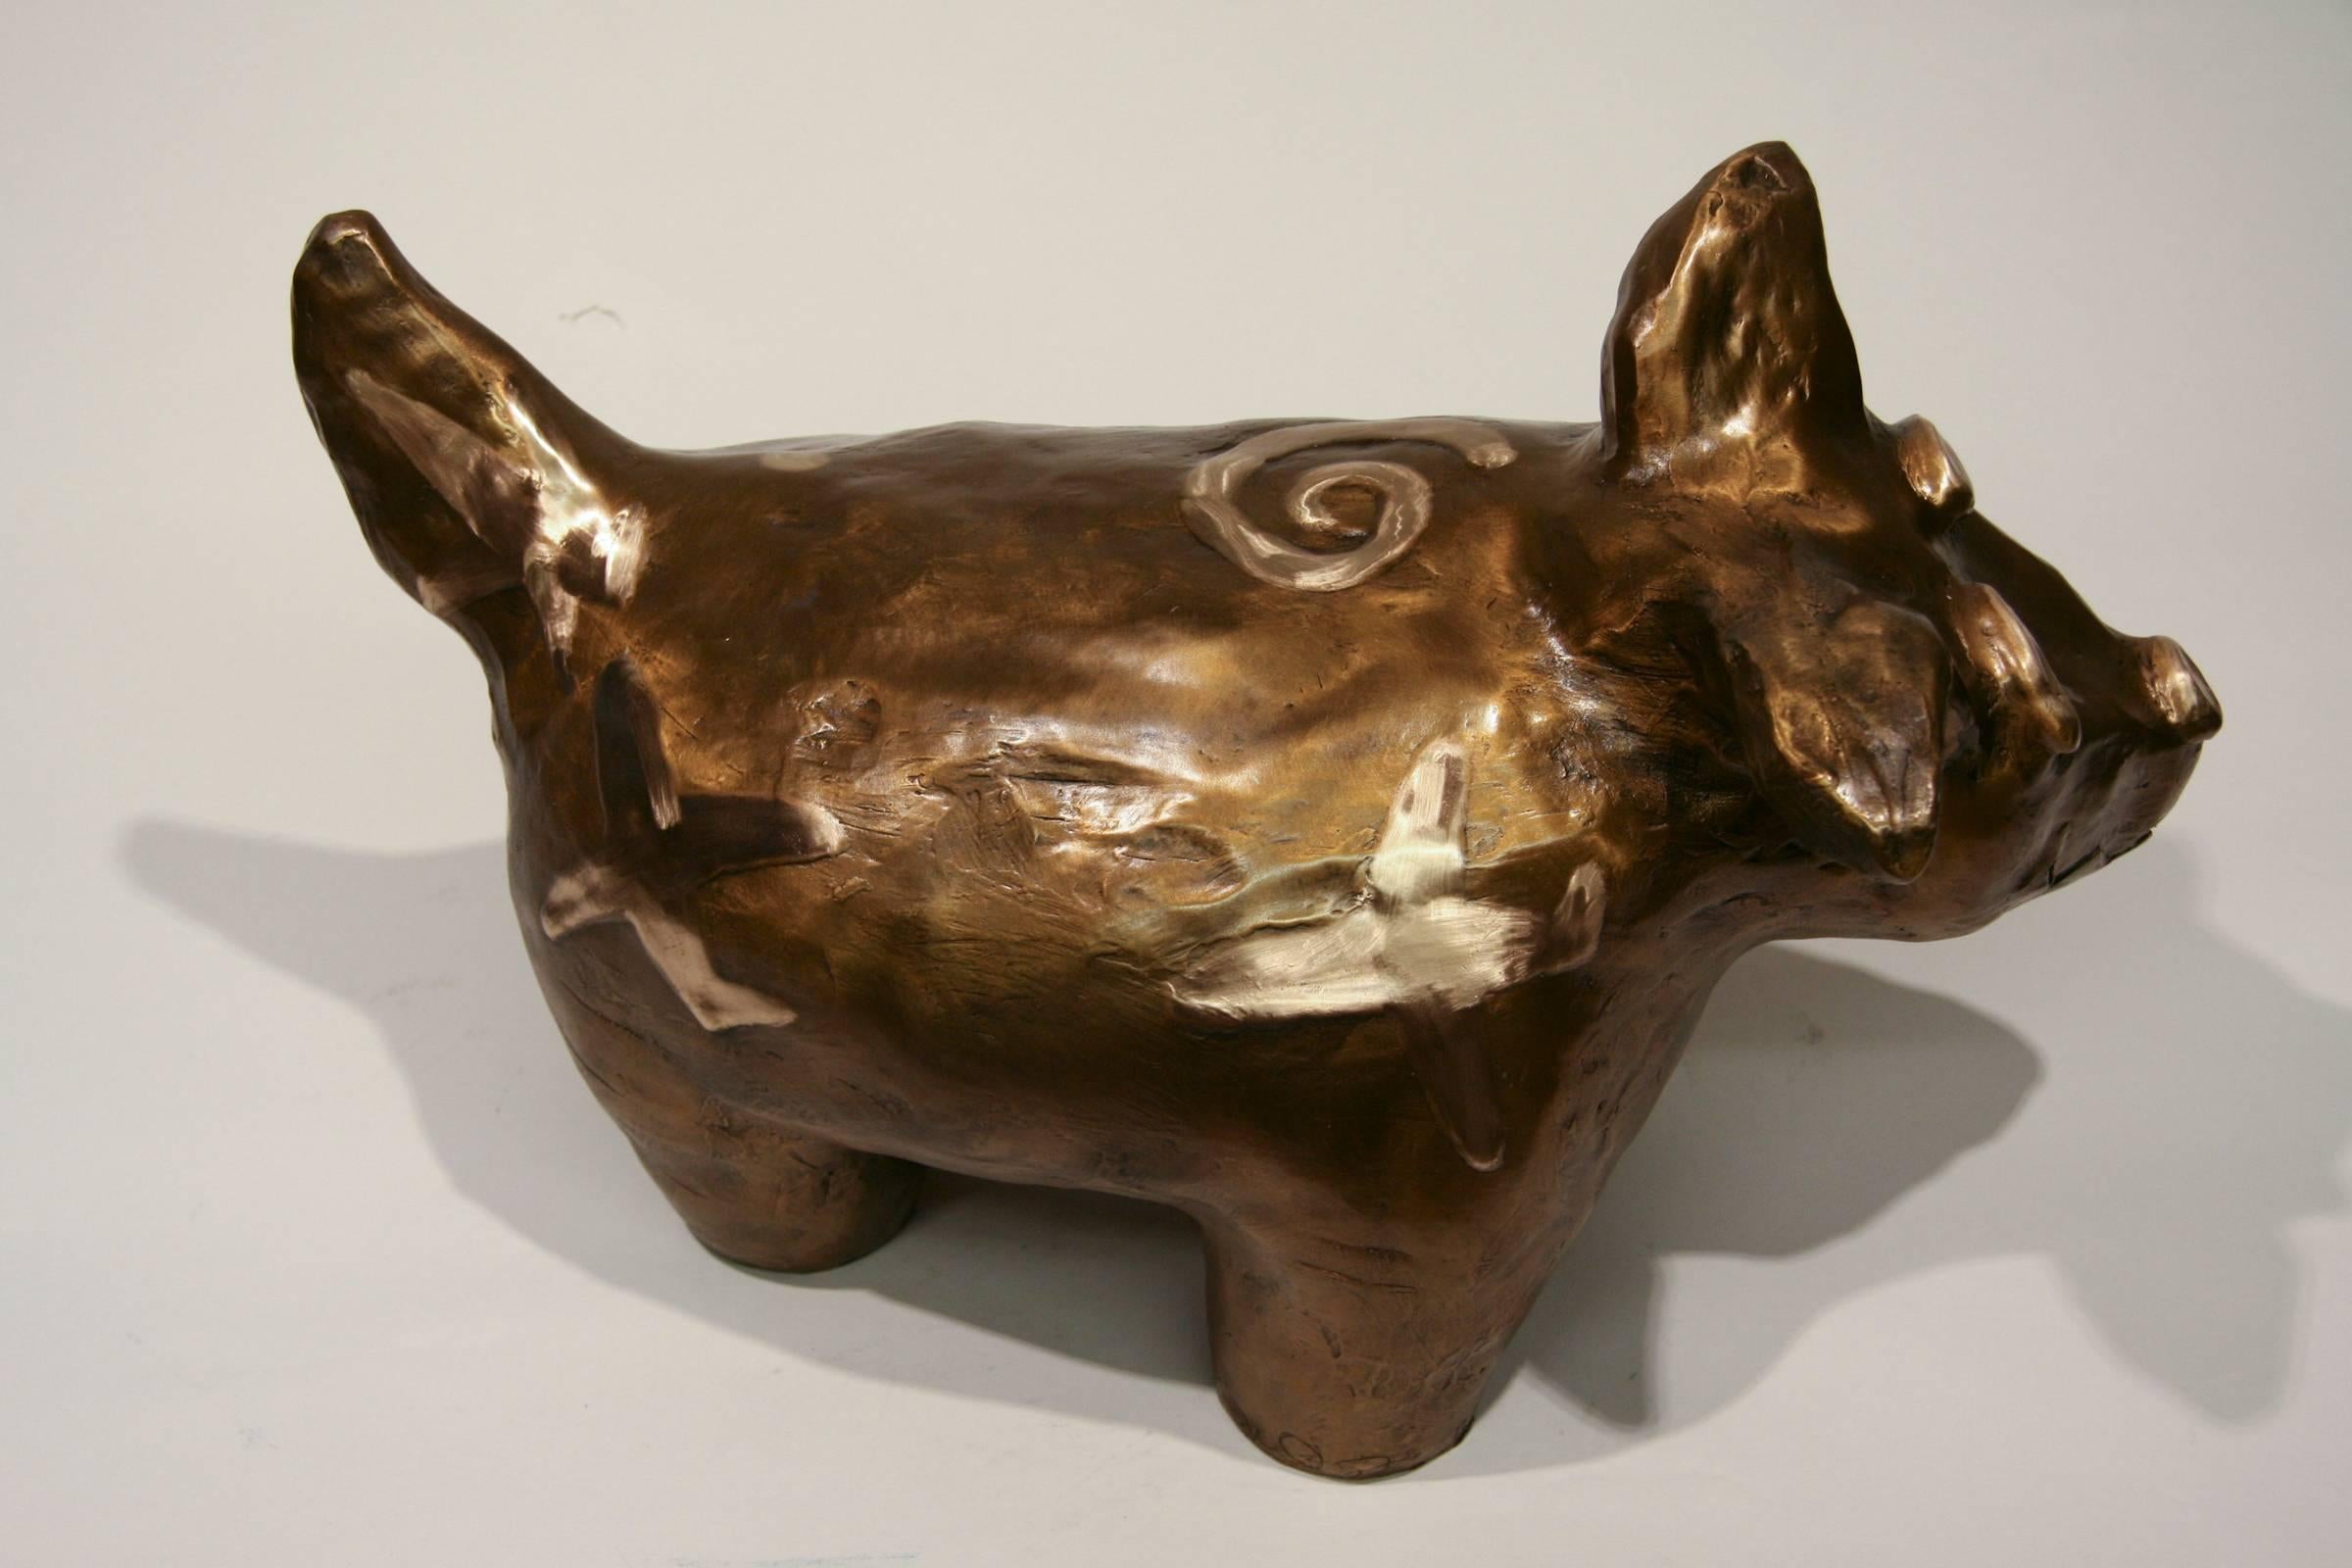 Levi Black Sheep Dreams of Flying, sculpture, by Melanie Yazzie, dog, airplanes

MELANIE YAZZIE, who has been represented by Glenn Green Galleries since 1994, is talented as a sculptor, painter and printmaker. She is a university professor who